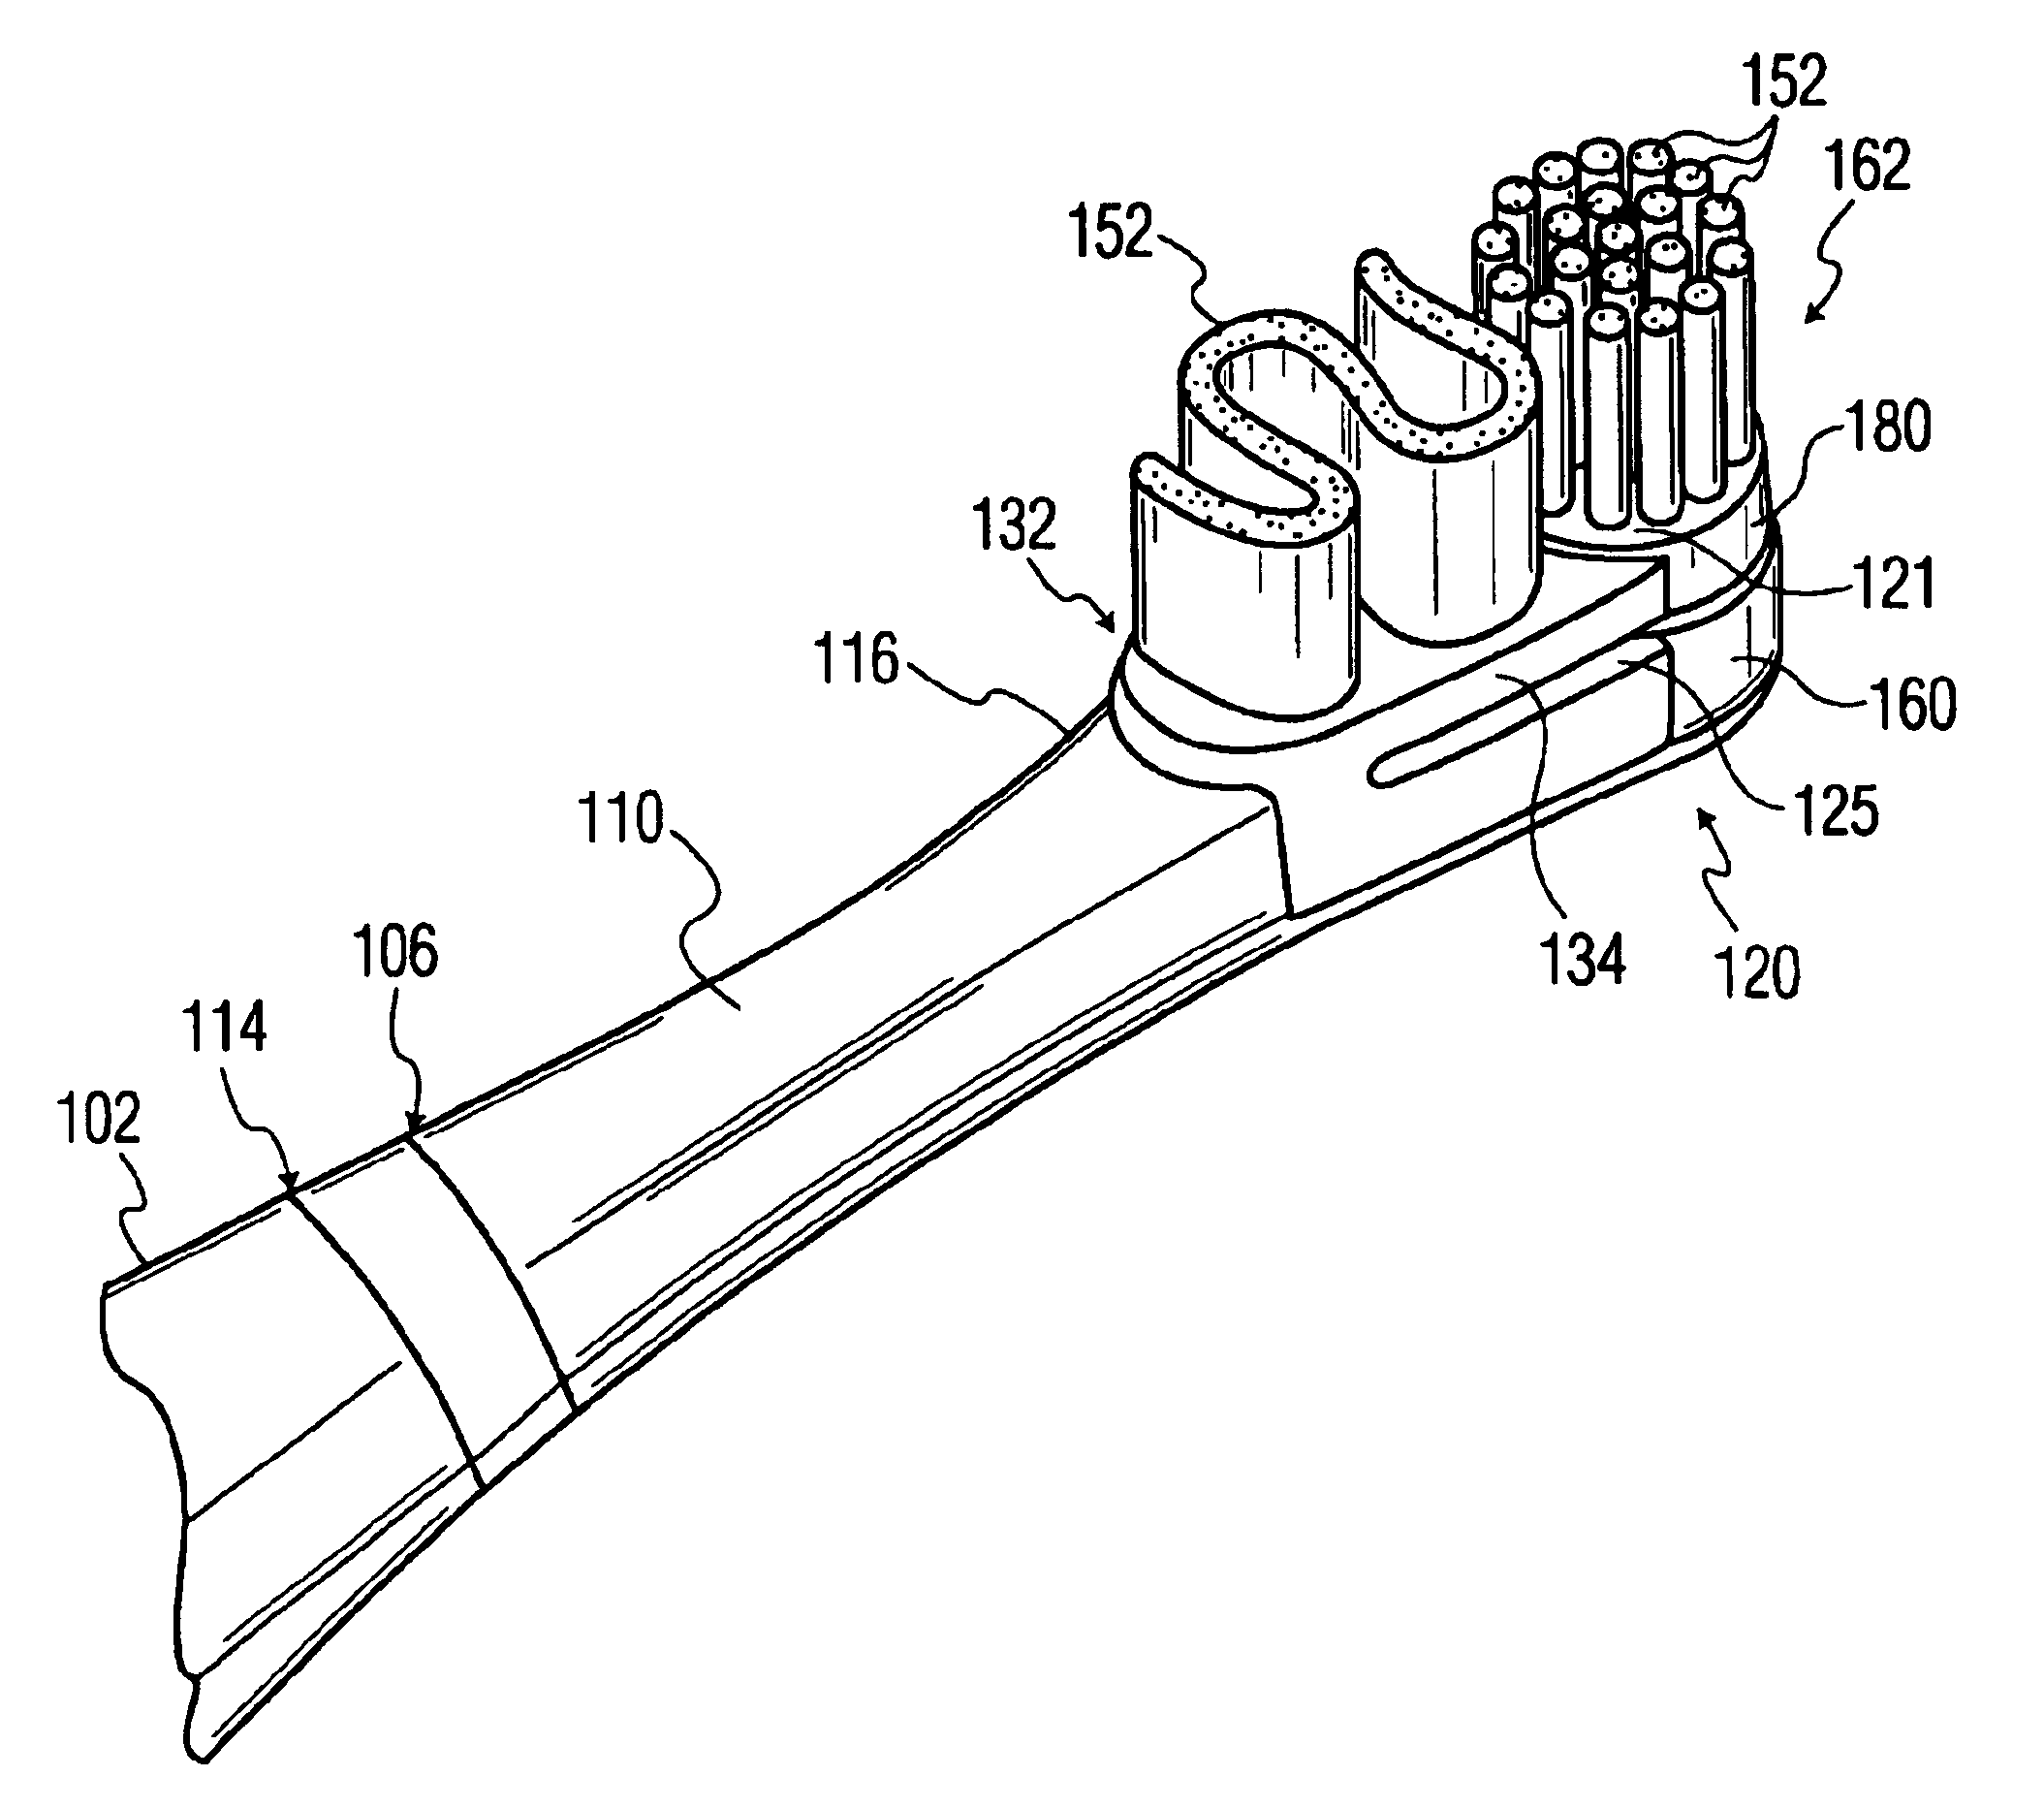 Toothbrush having a movable upstanding cleaning element